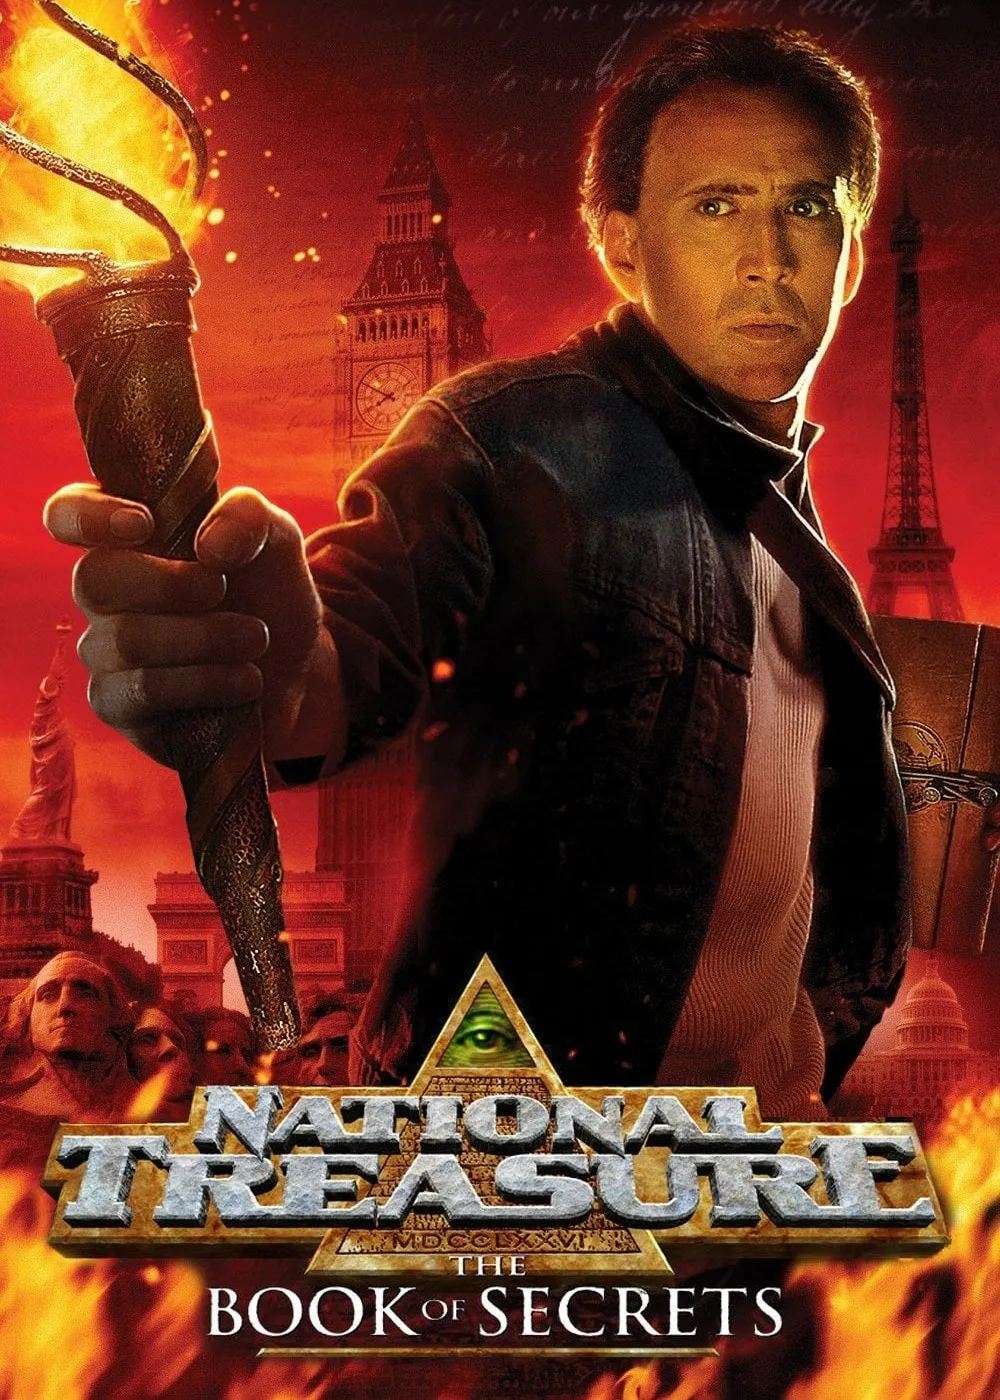 National Treasure 123MOVIES: A Thrilling Adventure for the Whole Family